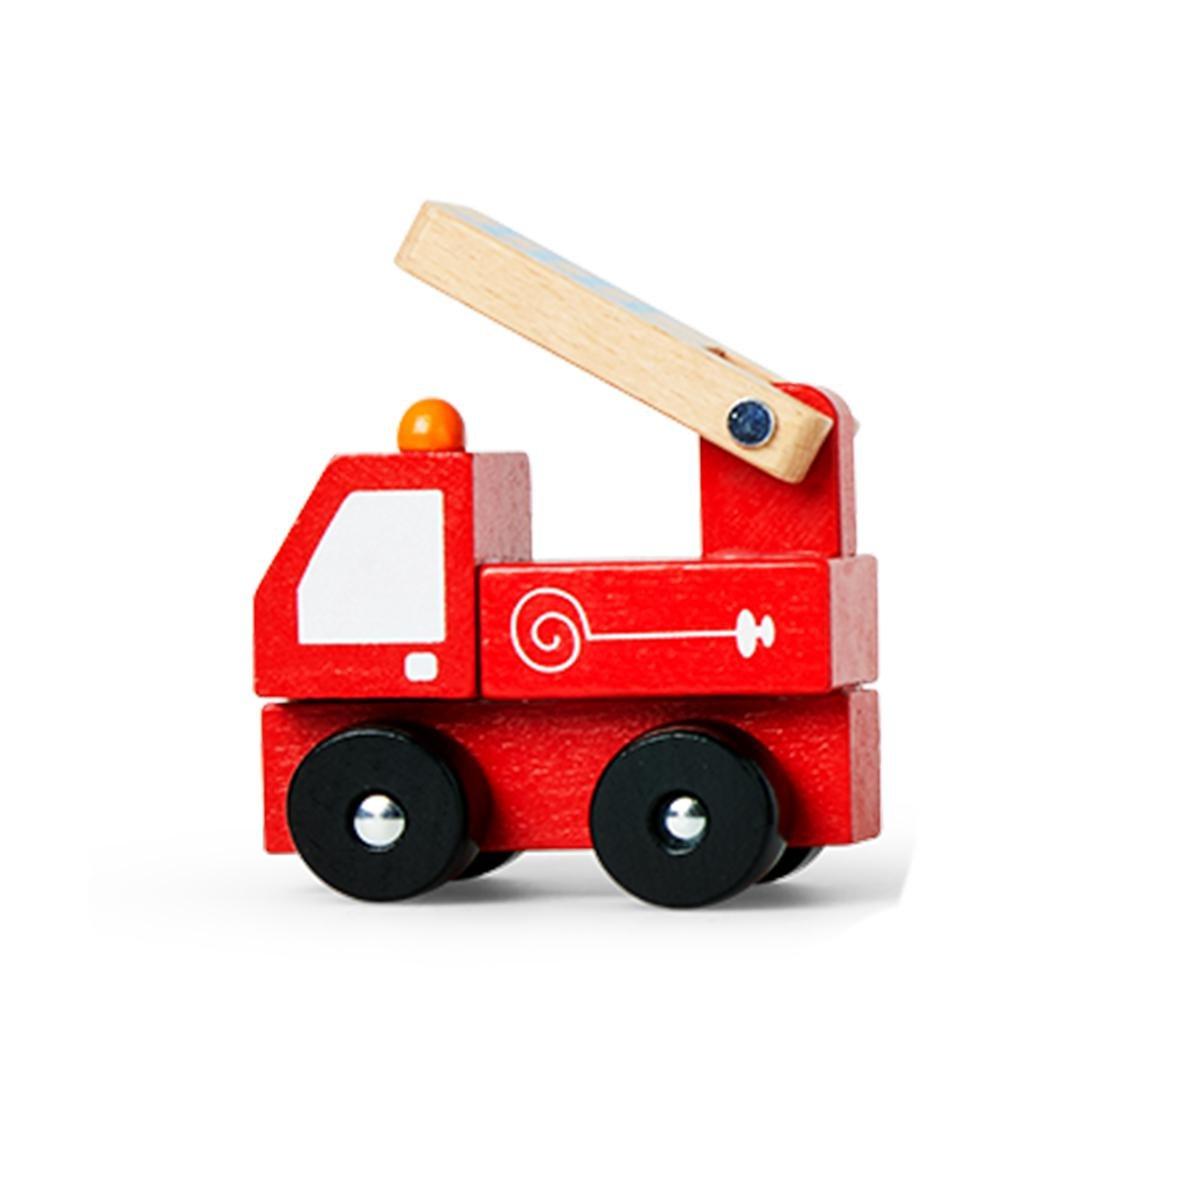 Red wooden fire engine